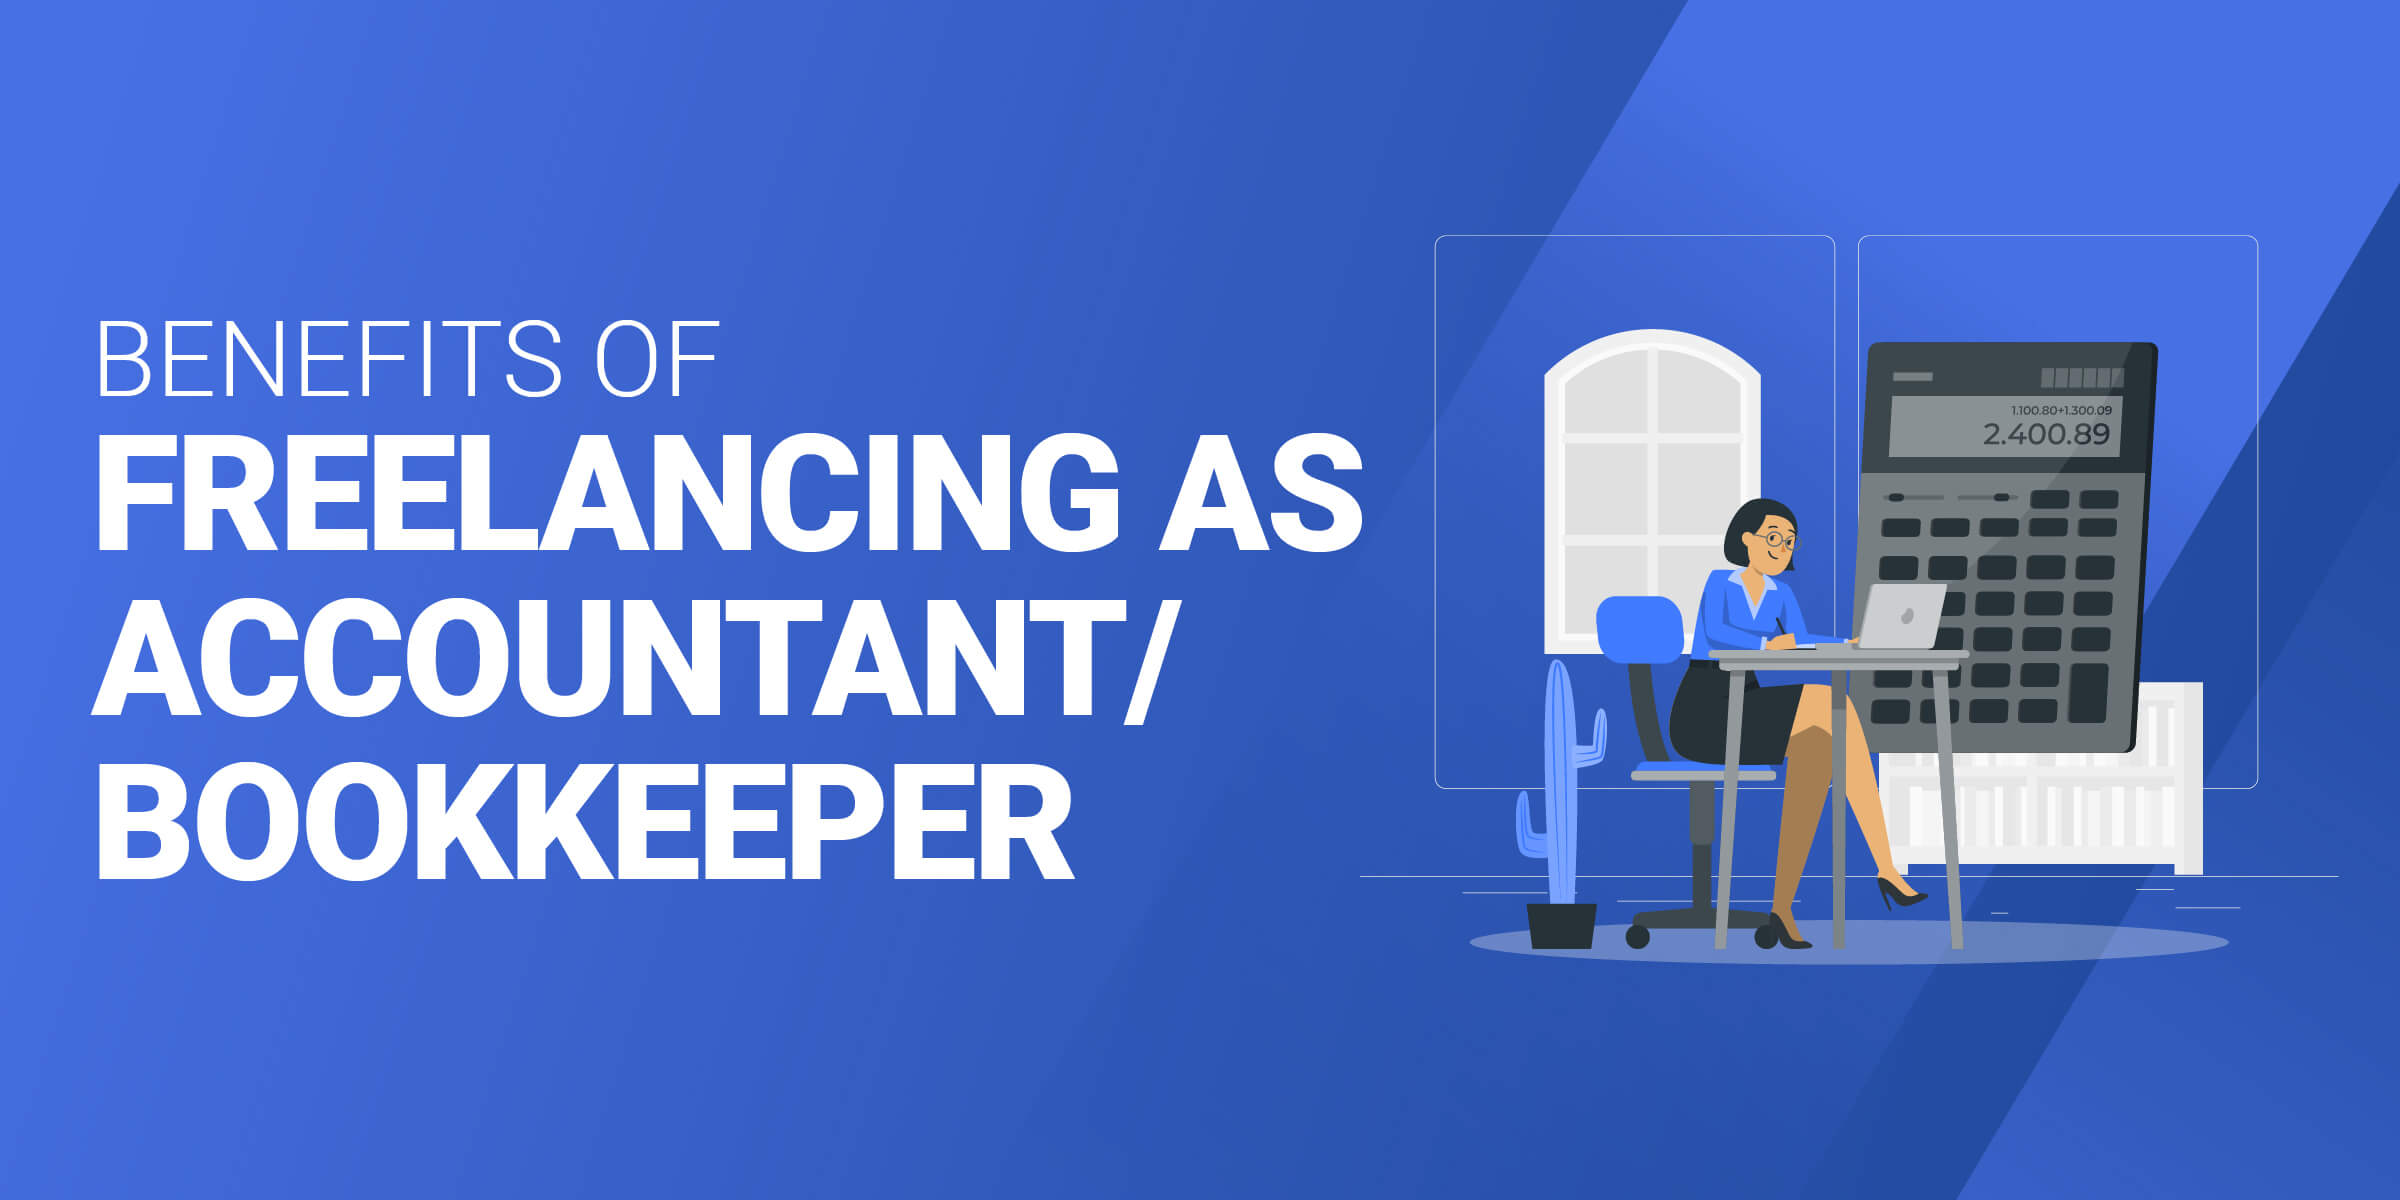 Benefits of Freelancing as Accountant